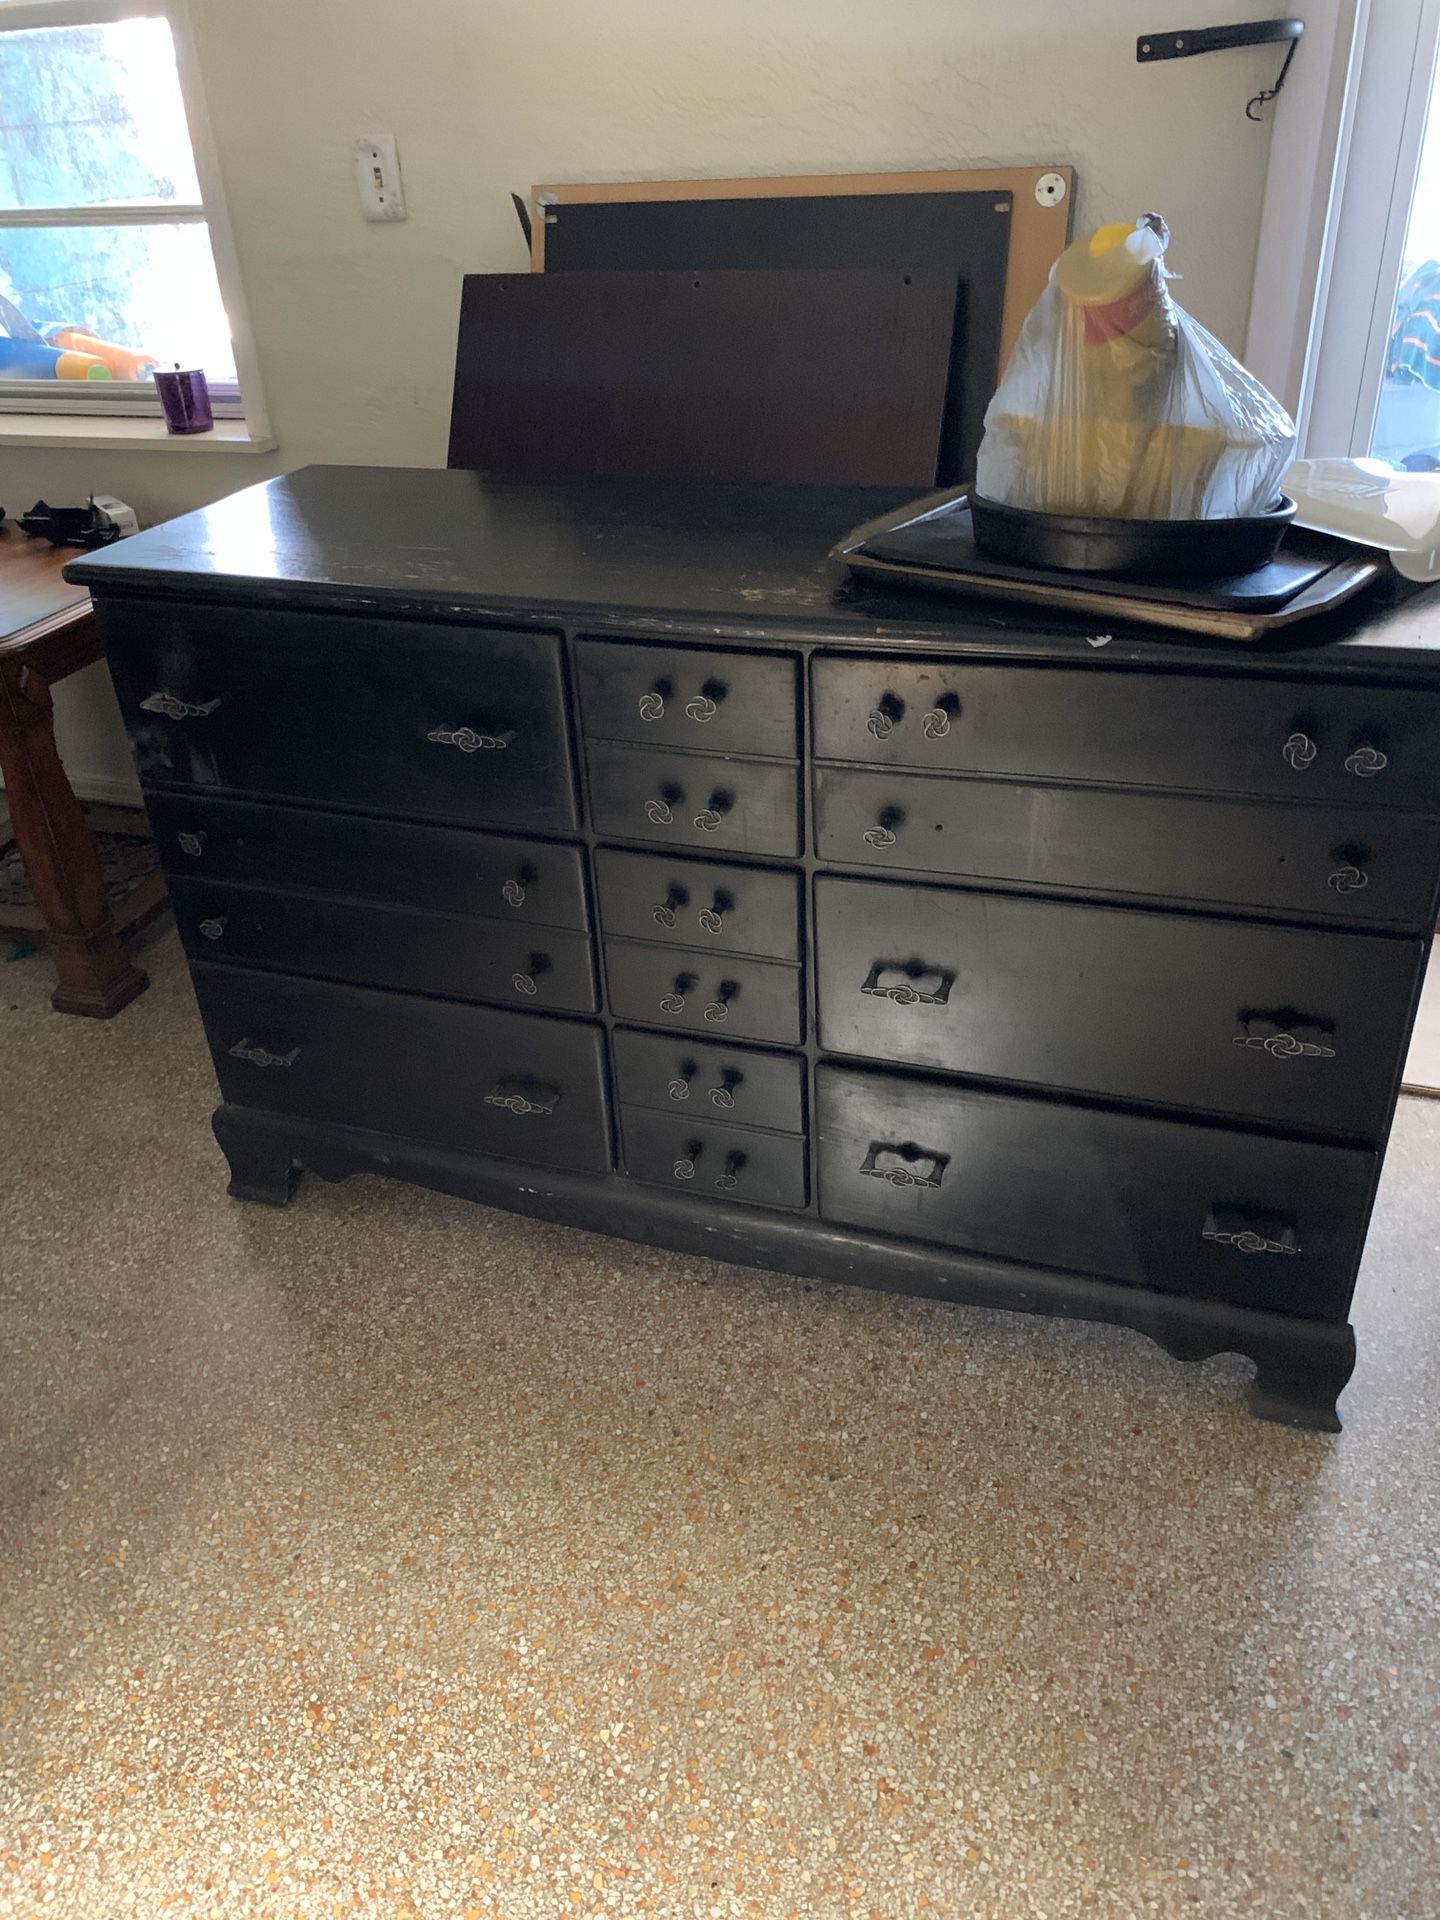 2 dressers that need a new home